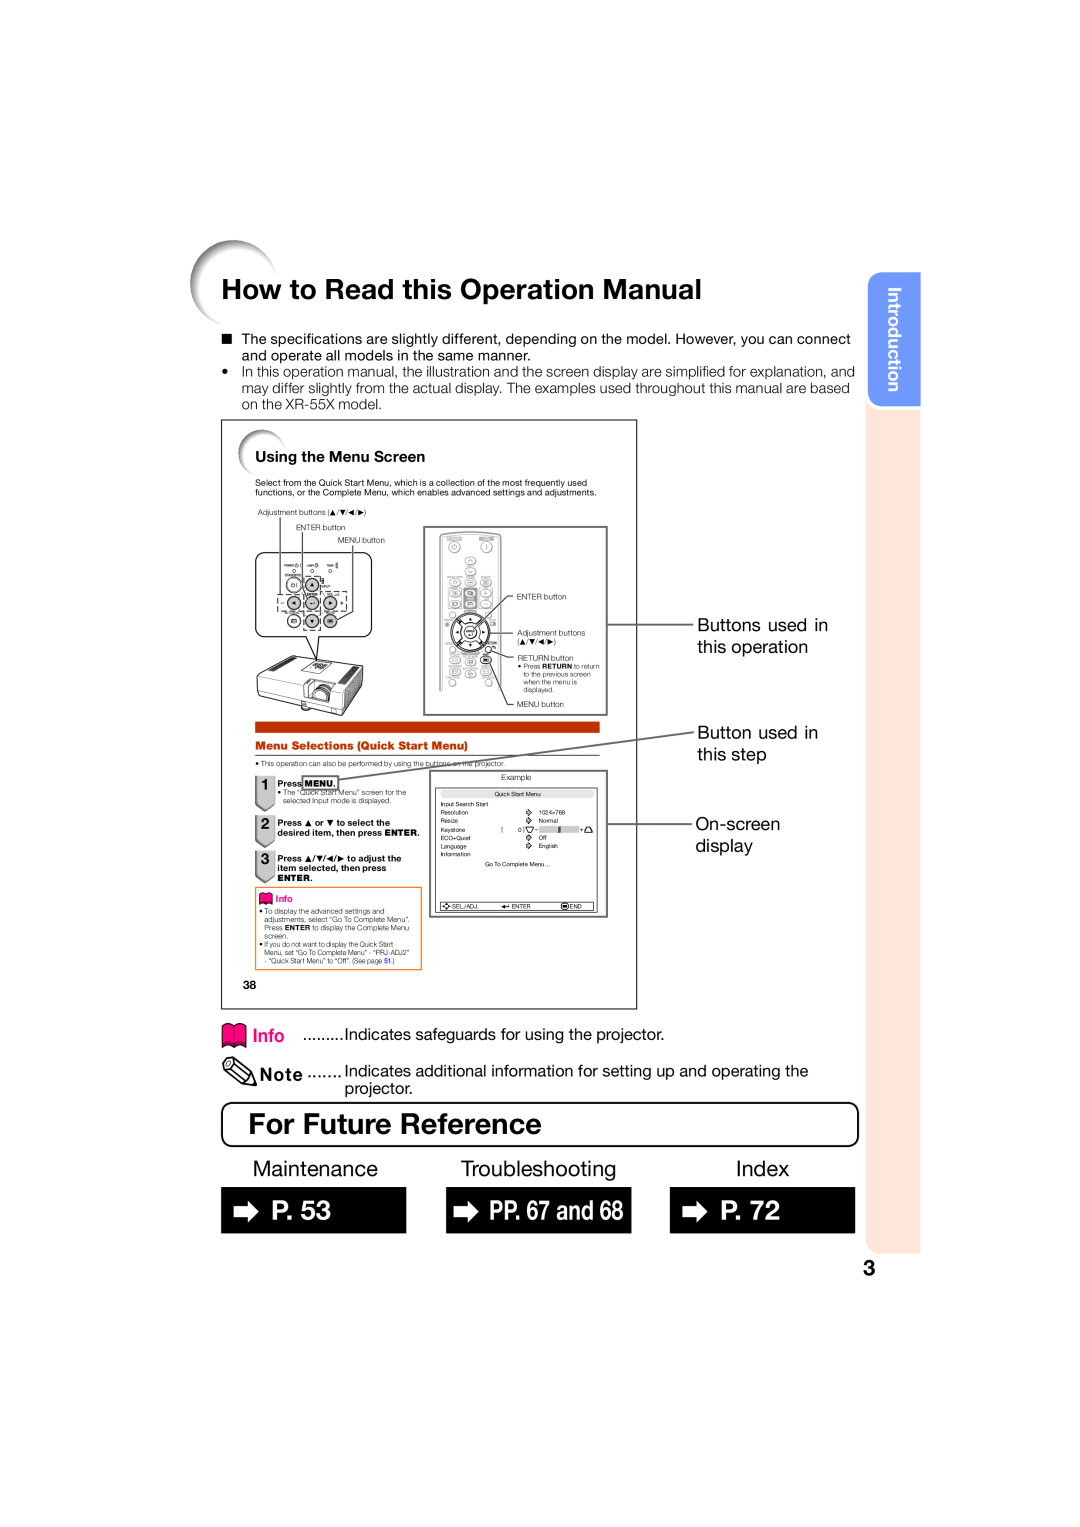 Sharp XR-50S How to Read this Operation Manual, For Future Reference, Maintenance, Troubleshooting, Index, PP. 67 and 